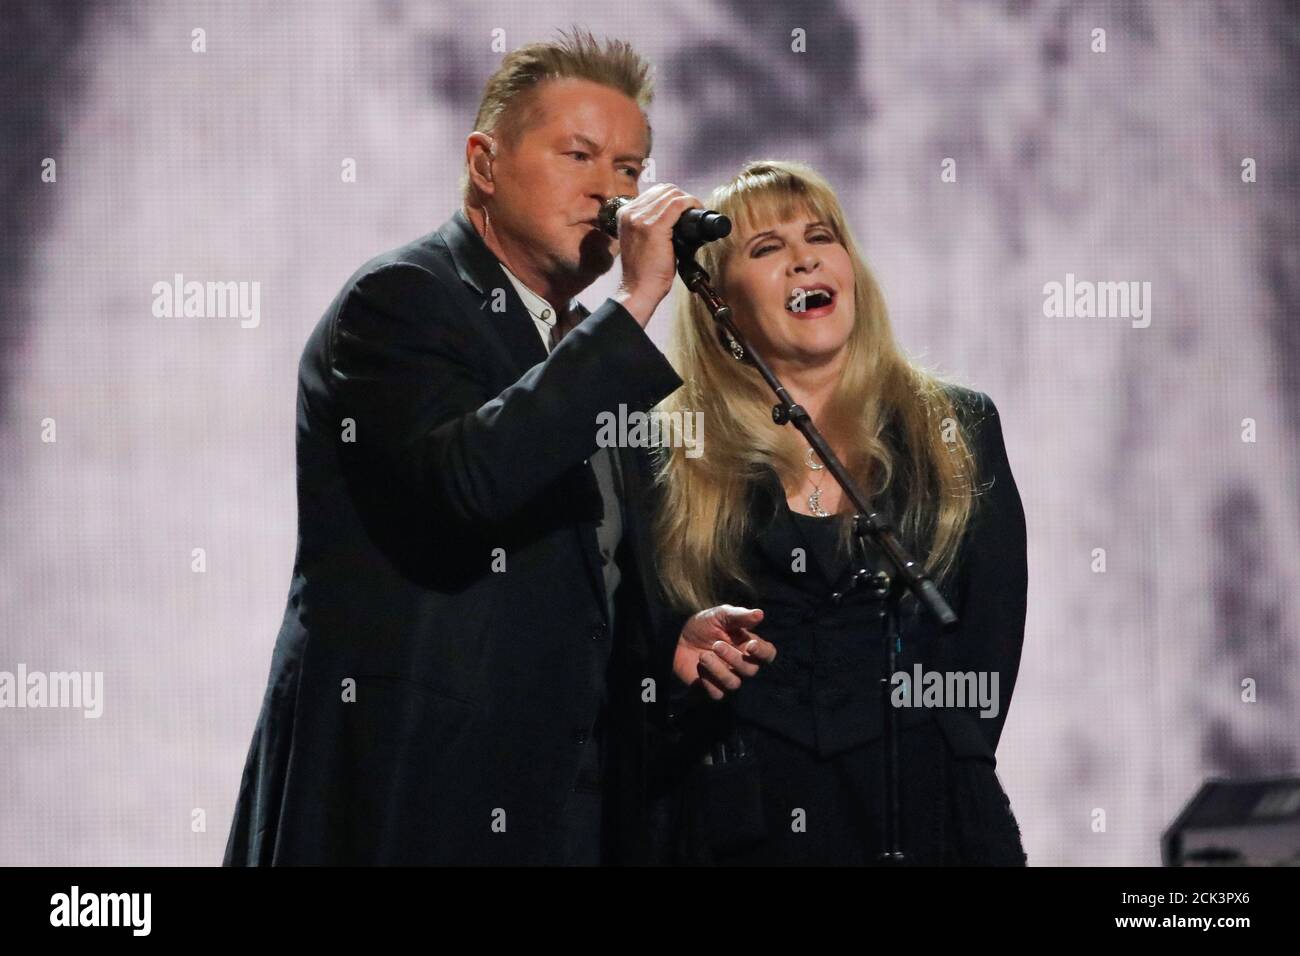 Don Henley and inductee Stevie Nicks (R) performs during the 2019 Rock and Roll  Hall of Fame induction ceremony in Brooklyn, New York, U.S., March 29, 2019.  REUTERS/Mike Segar Stock Photo - Alamy